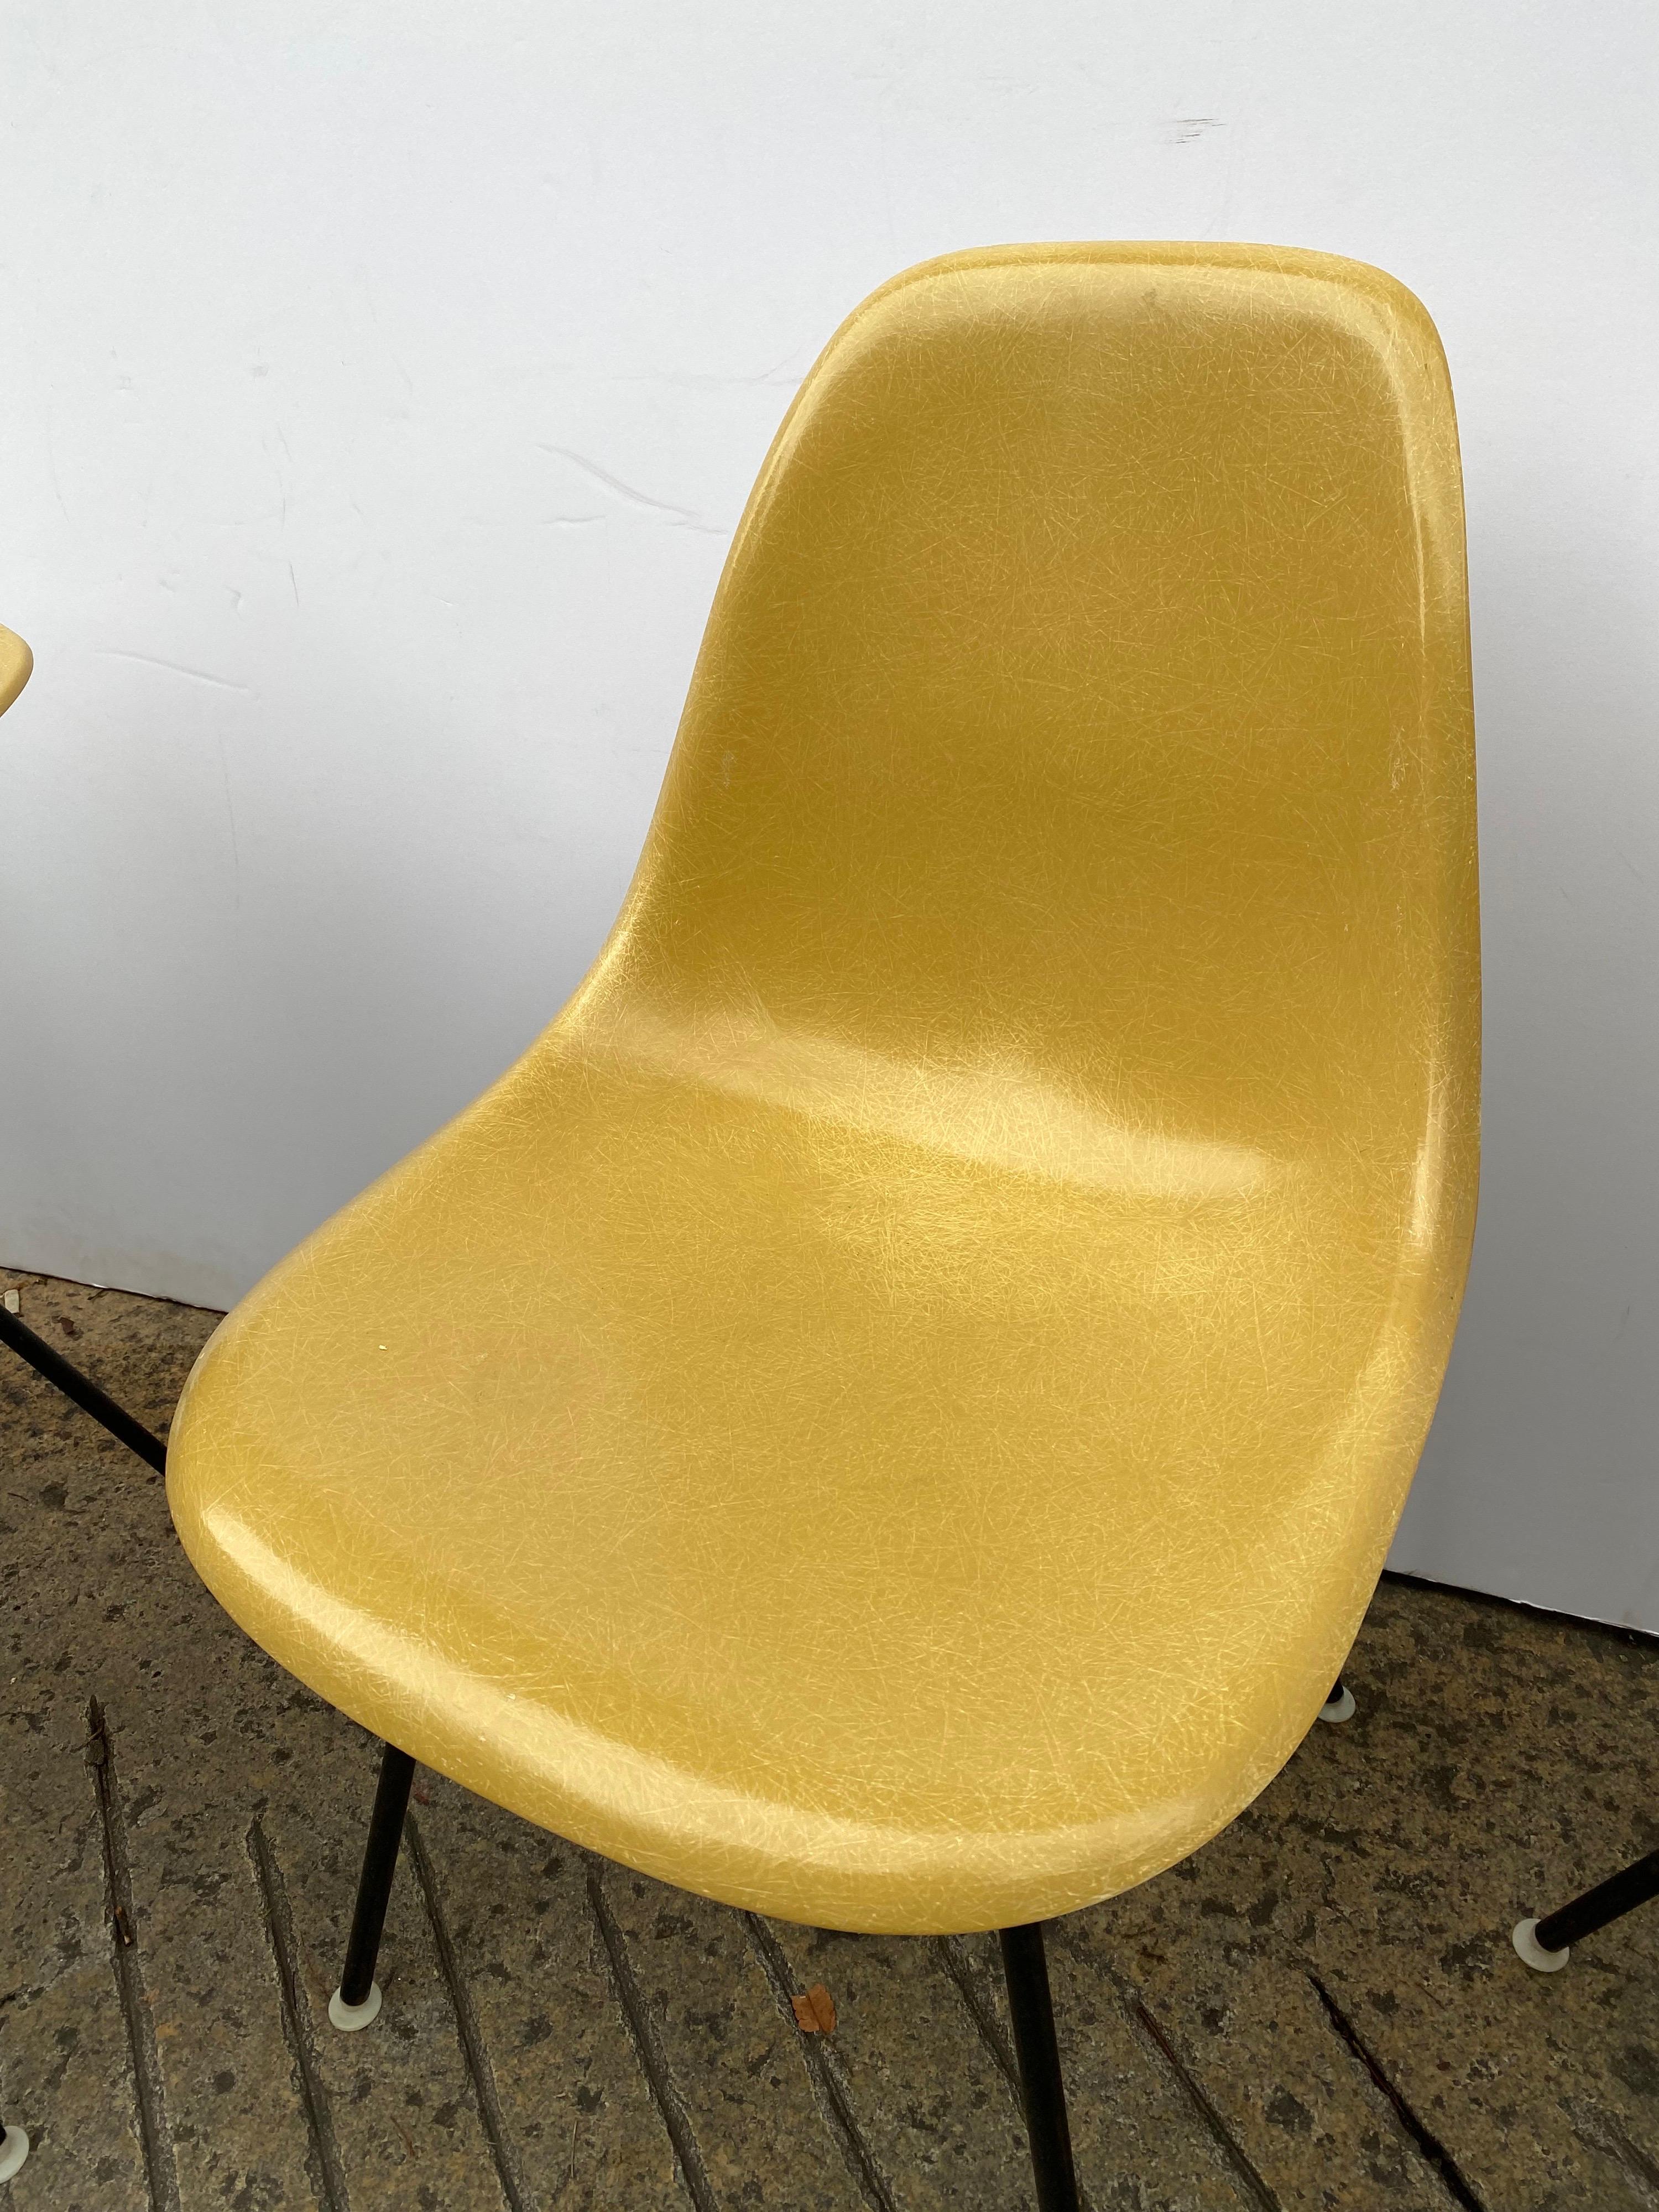 Mid-20th Century Set of 6 Charles and Ray Eames Fiberglass Chairs